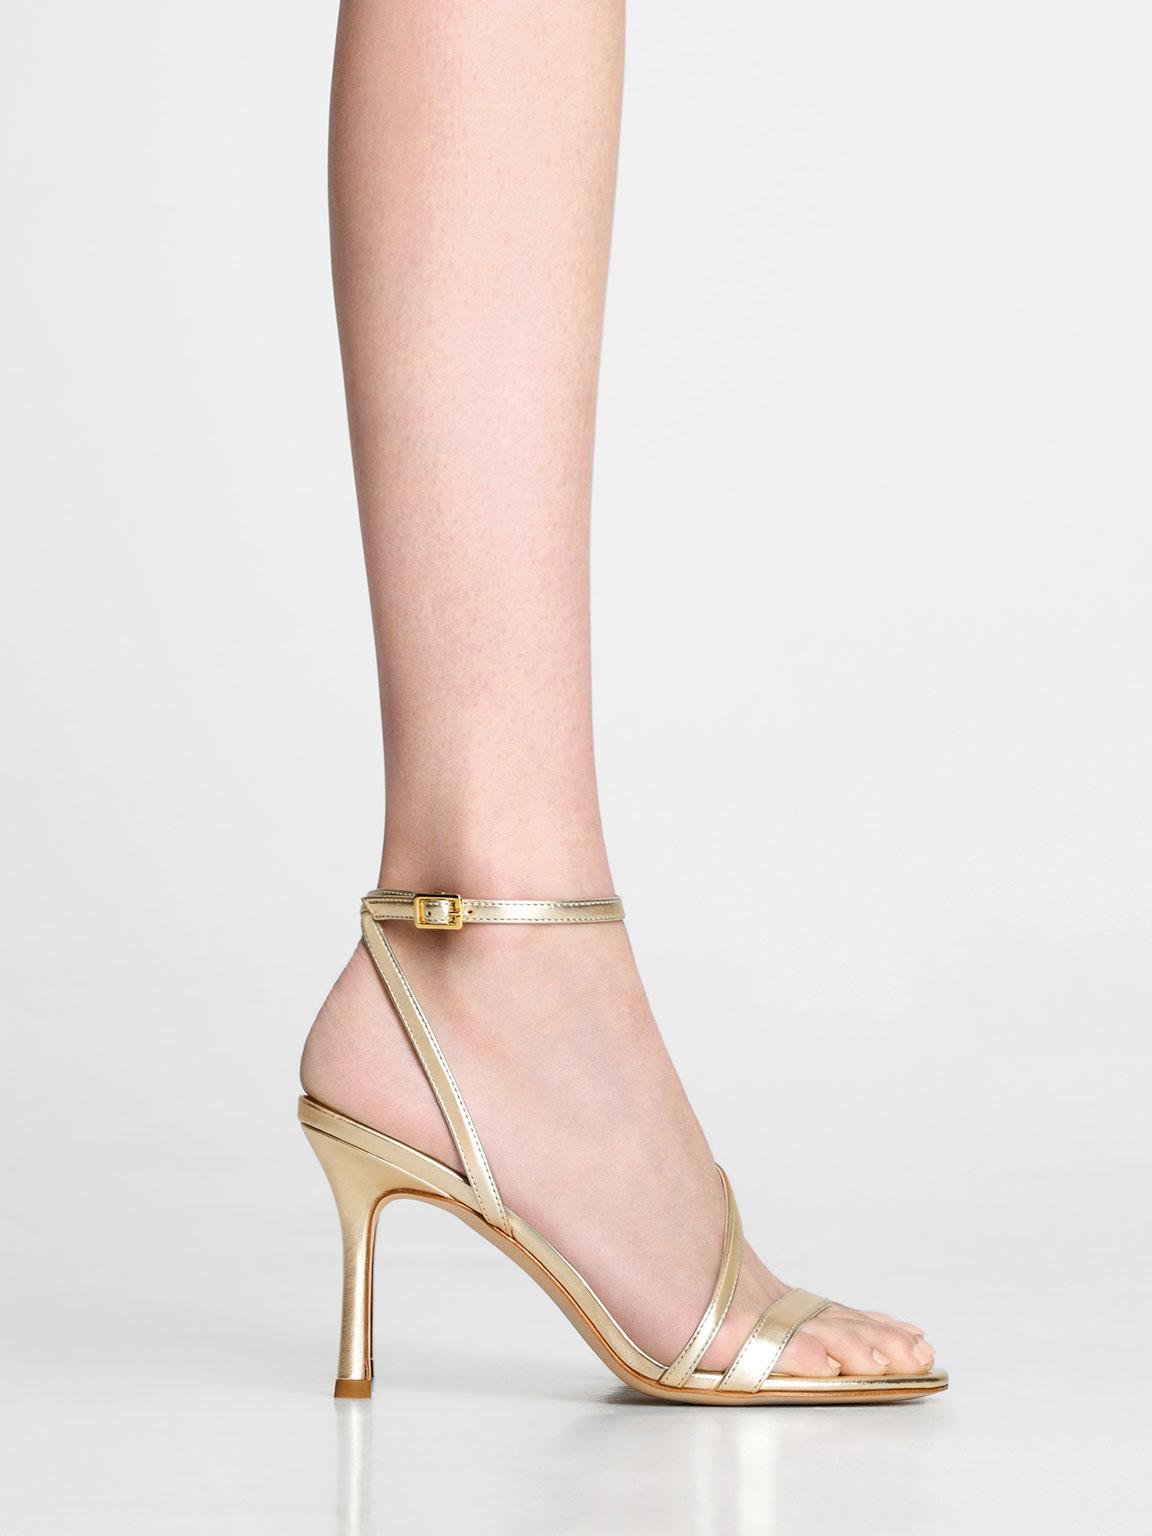 charles keith Gold Metallic Asymmetric Strappy Heeled Sandals